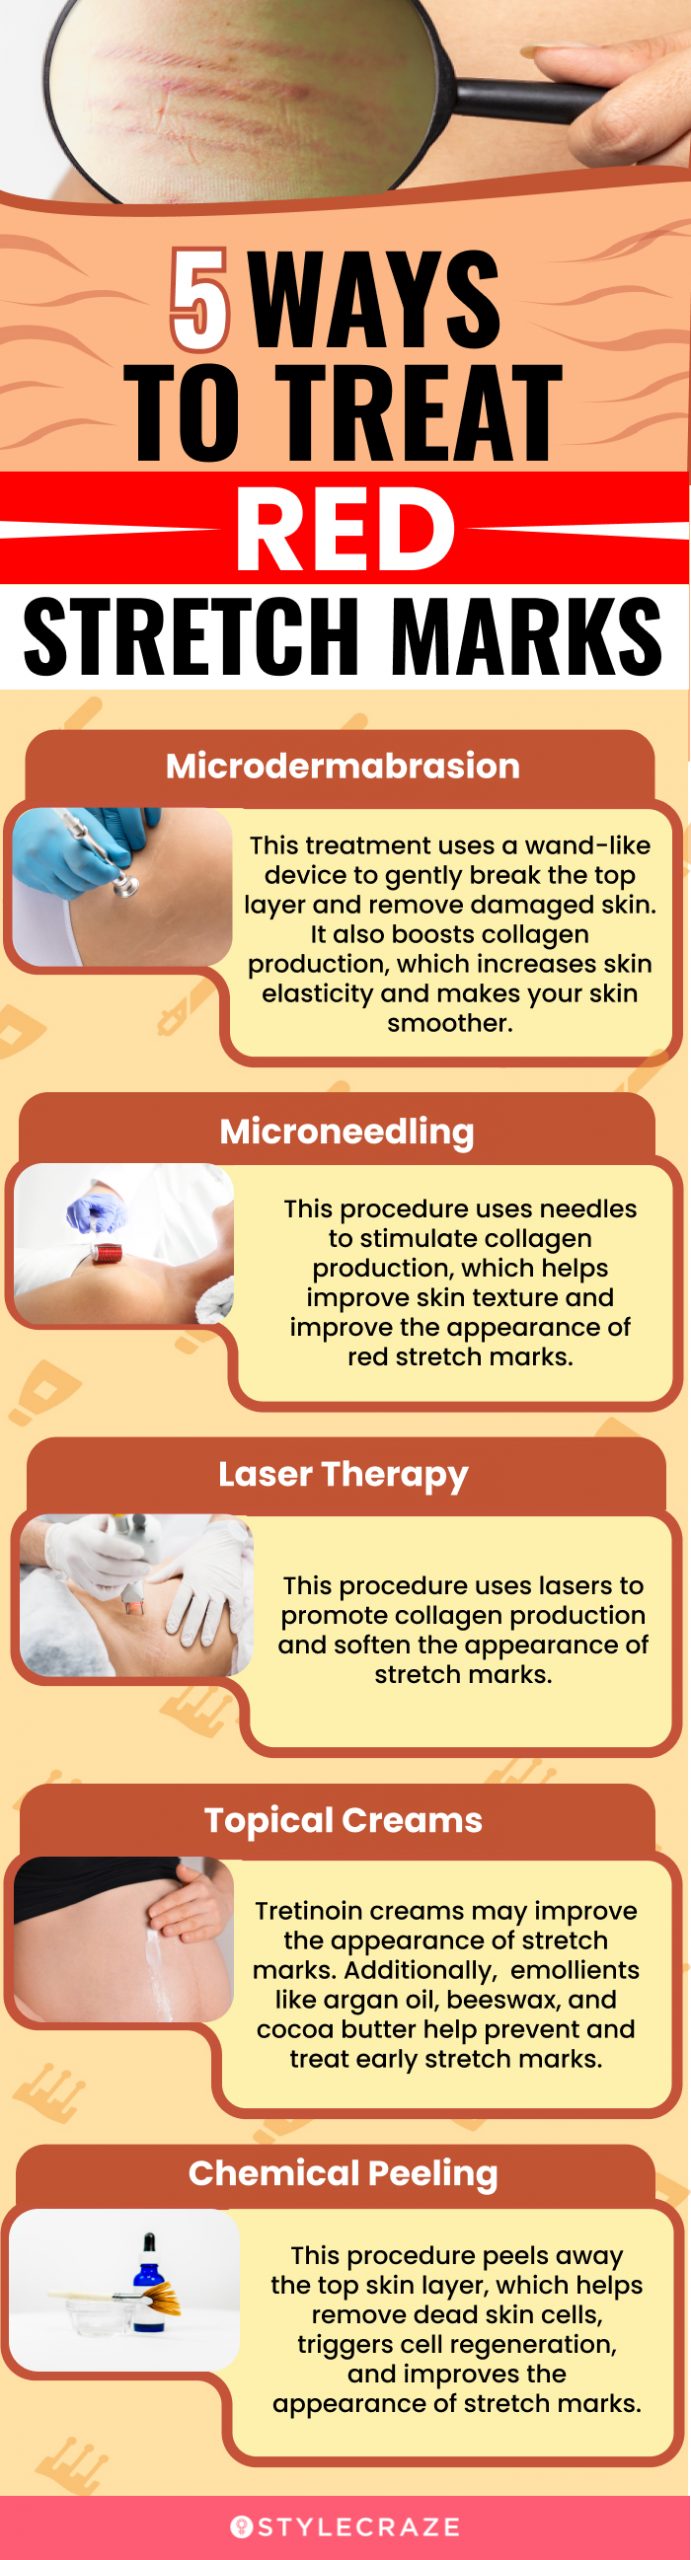 5 ways to treat red stretch marks (infographic)